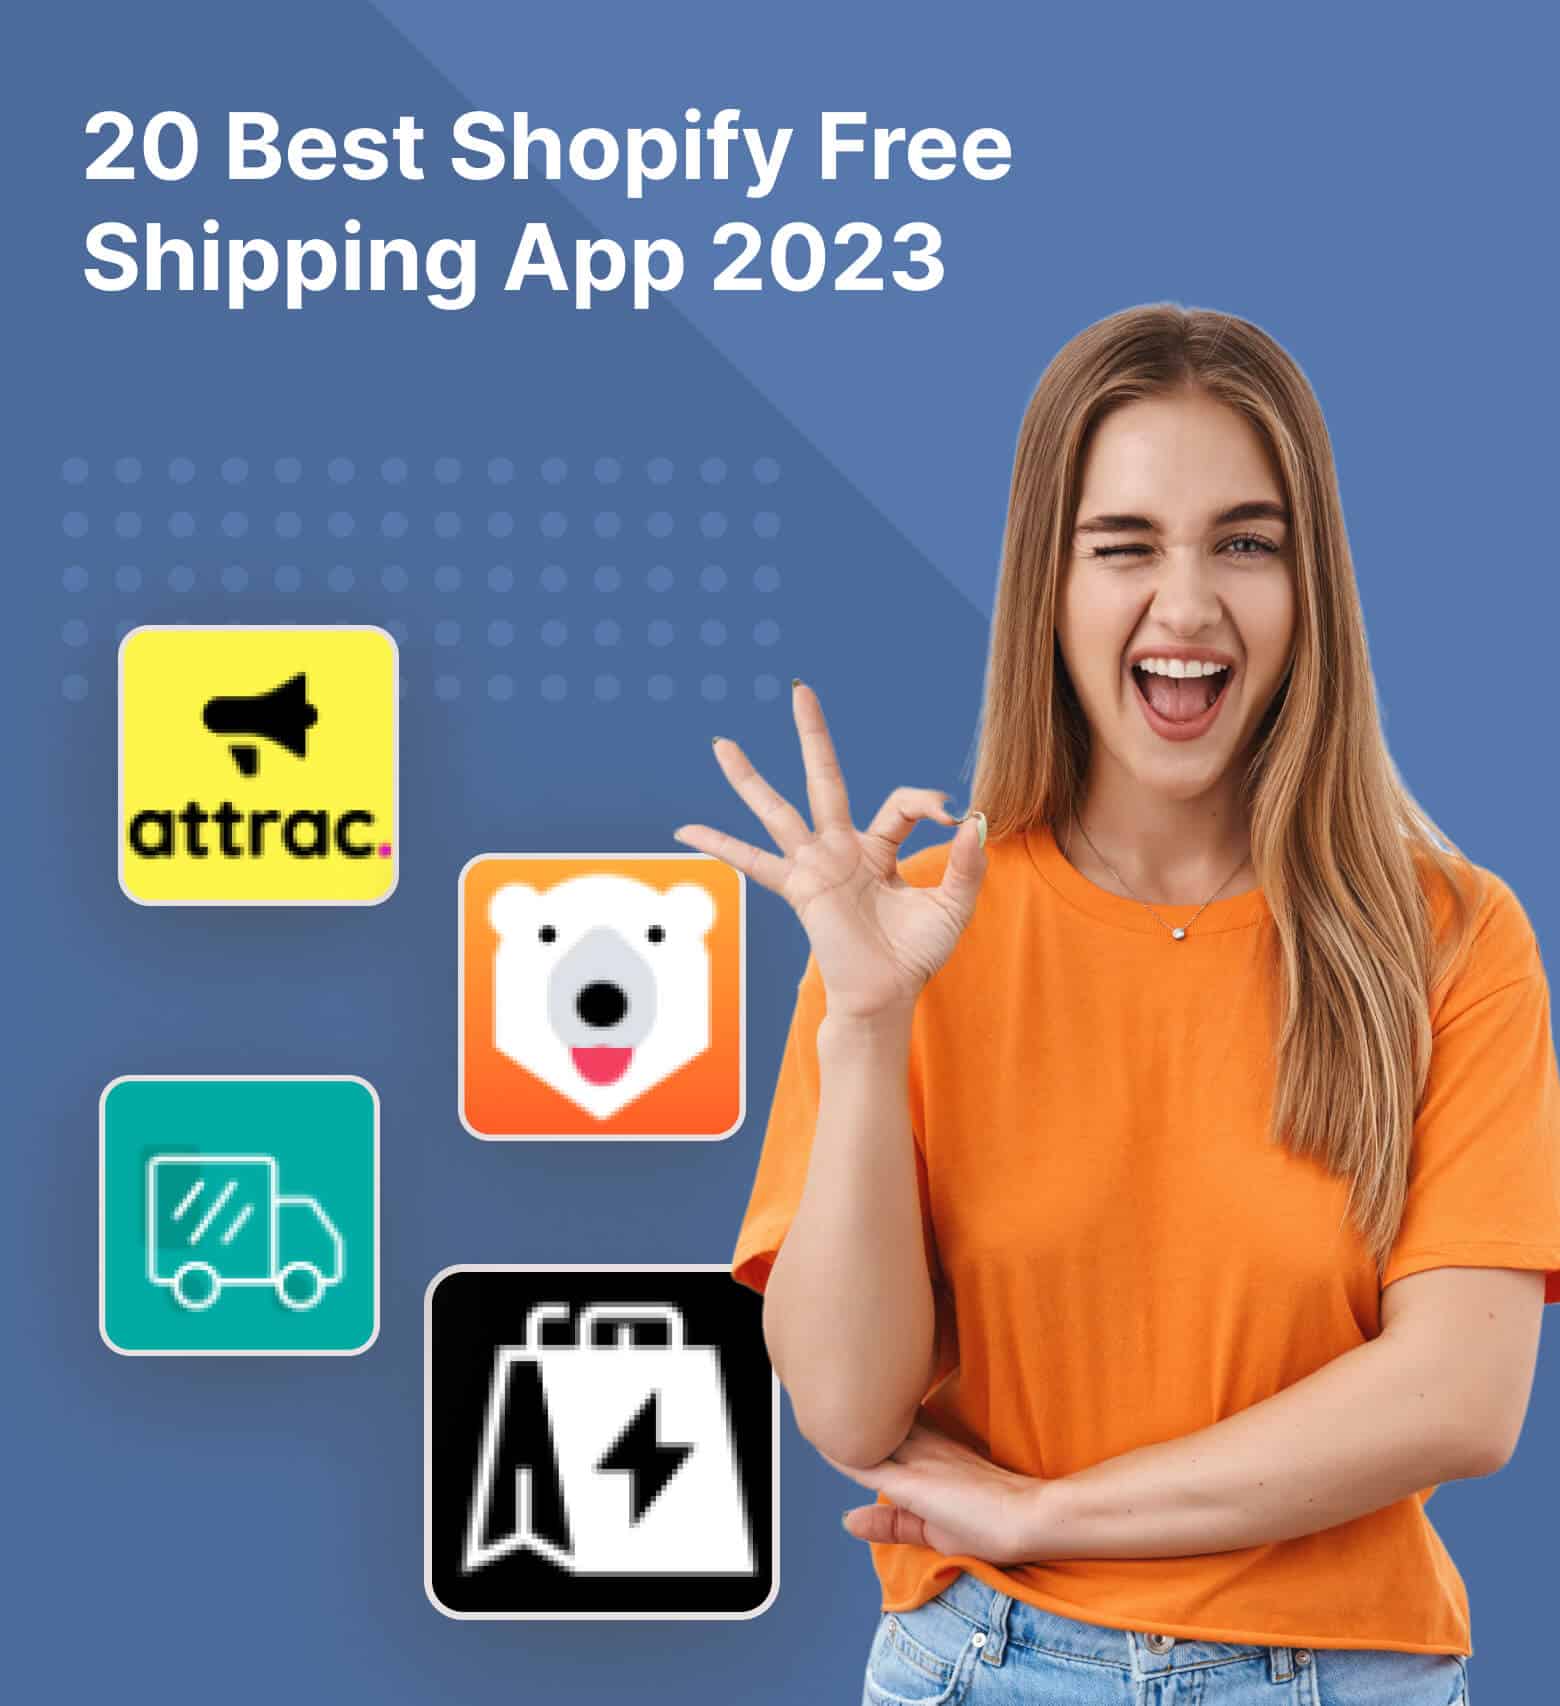 20 Best Shopify Free Shipping App